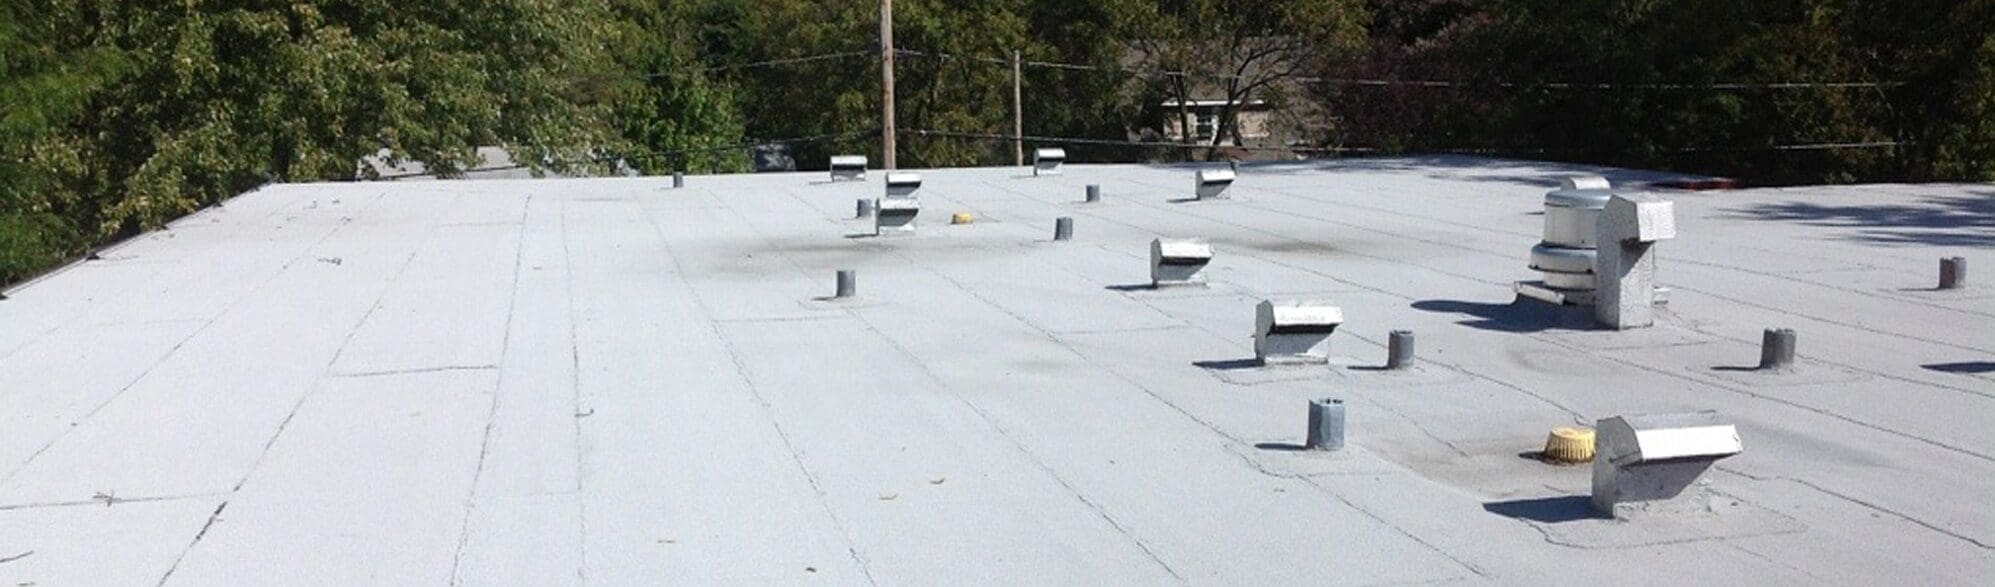 Roofing Companies Exploring Membrane Roofing: A Durable Solution Offered by Storm Damage Experts and Alliance Specialty Contractor